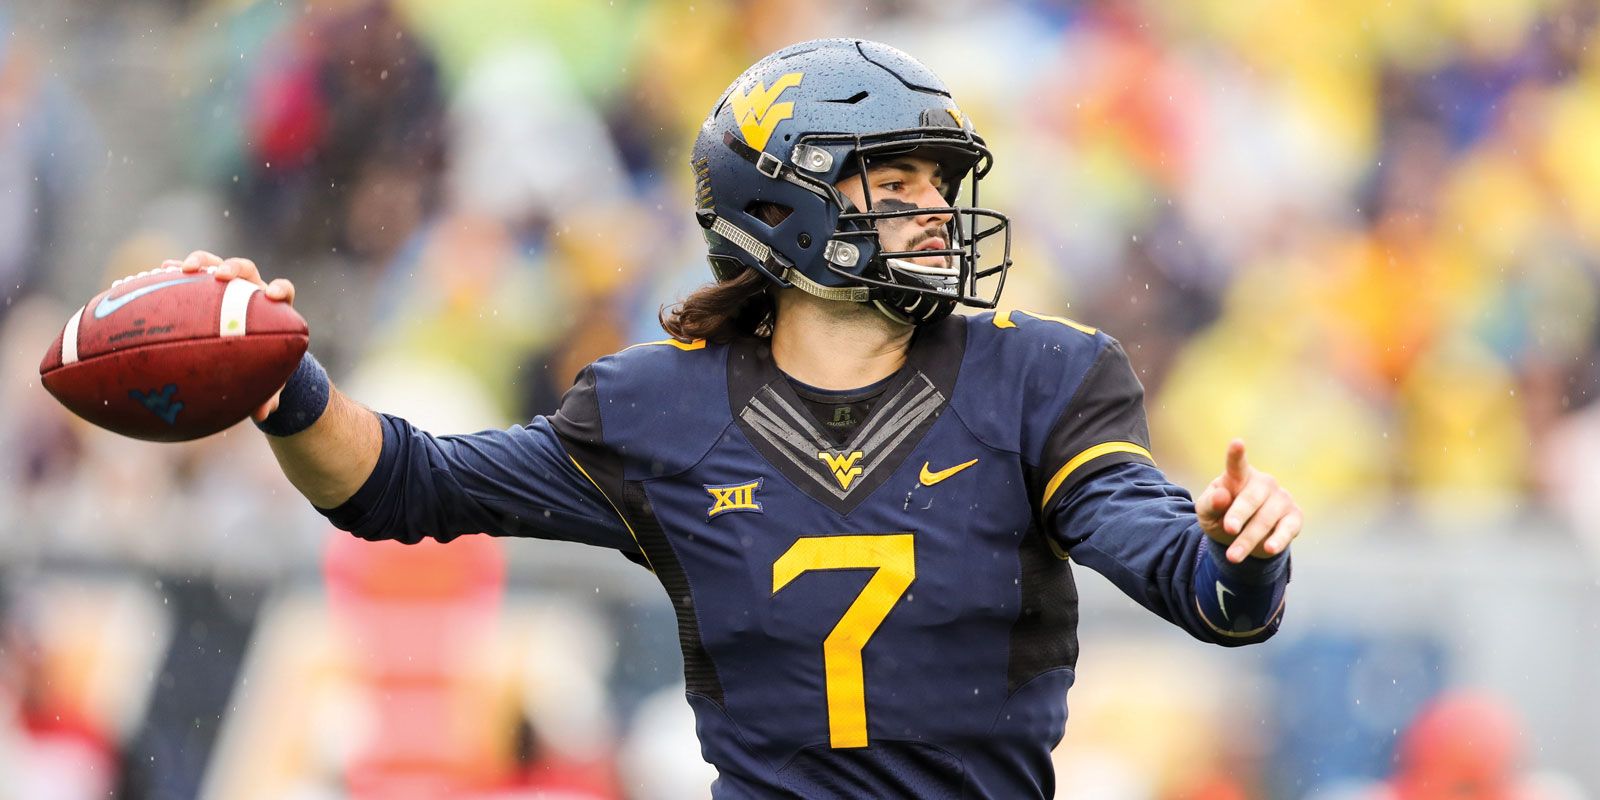 Will Grier throwing a football